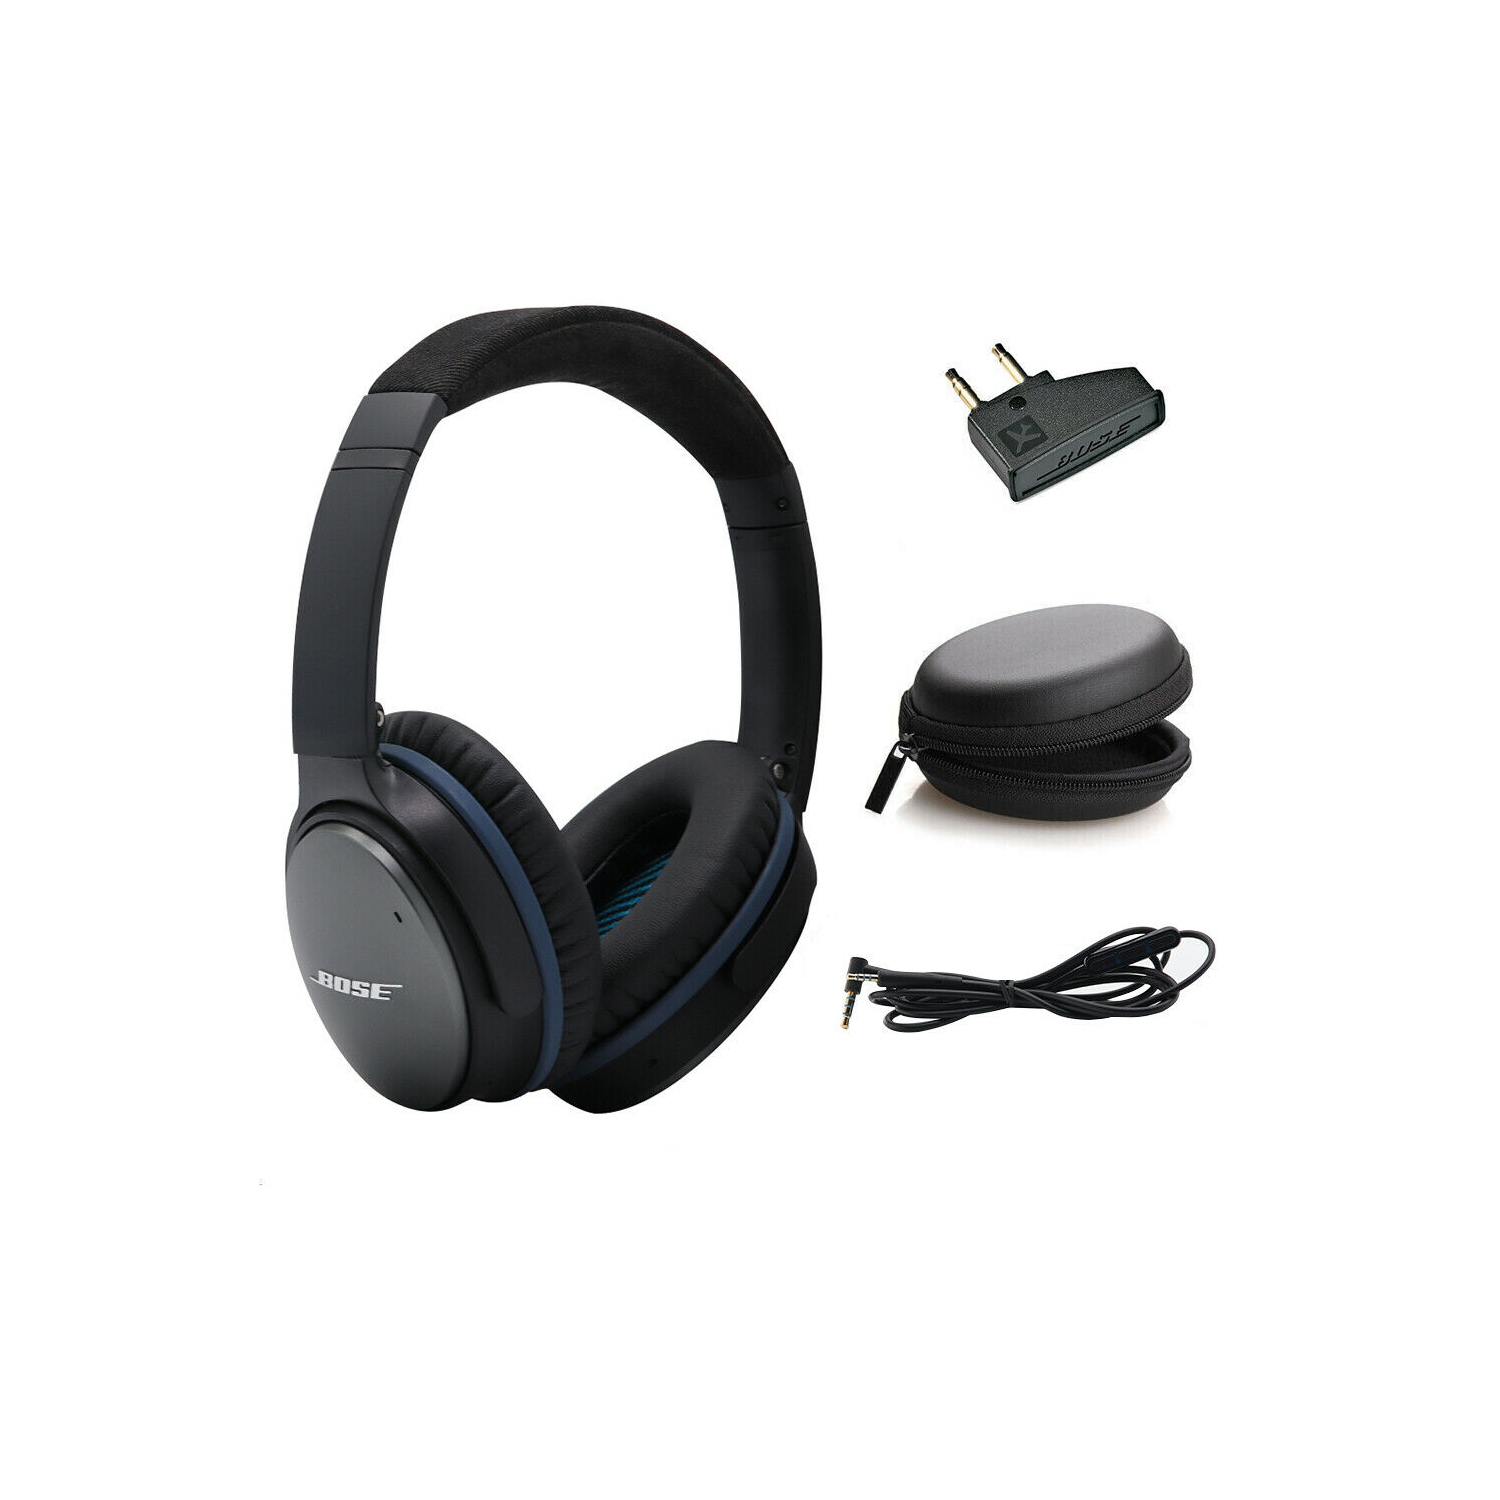 Refurbished (Good) - Bose QuietComfort 25 Acoustic Noise Cancelling Headphones QC25 Wired Headsets